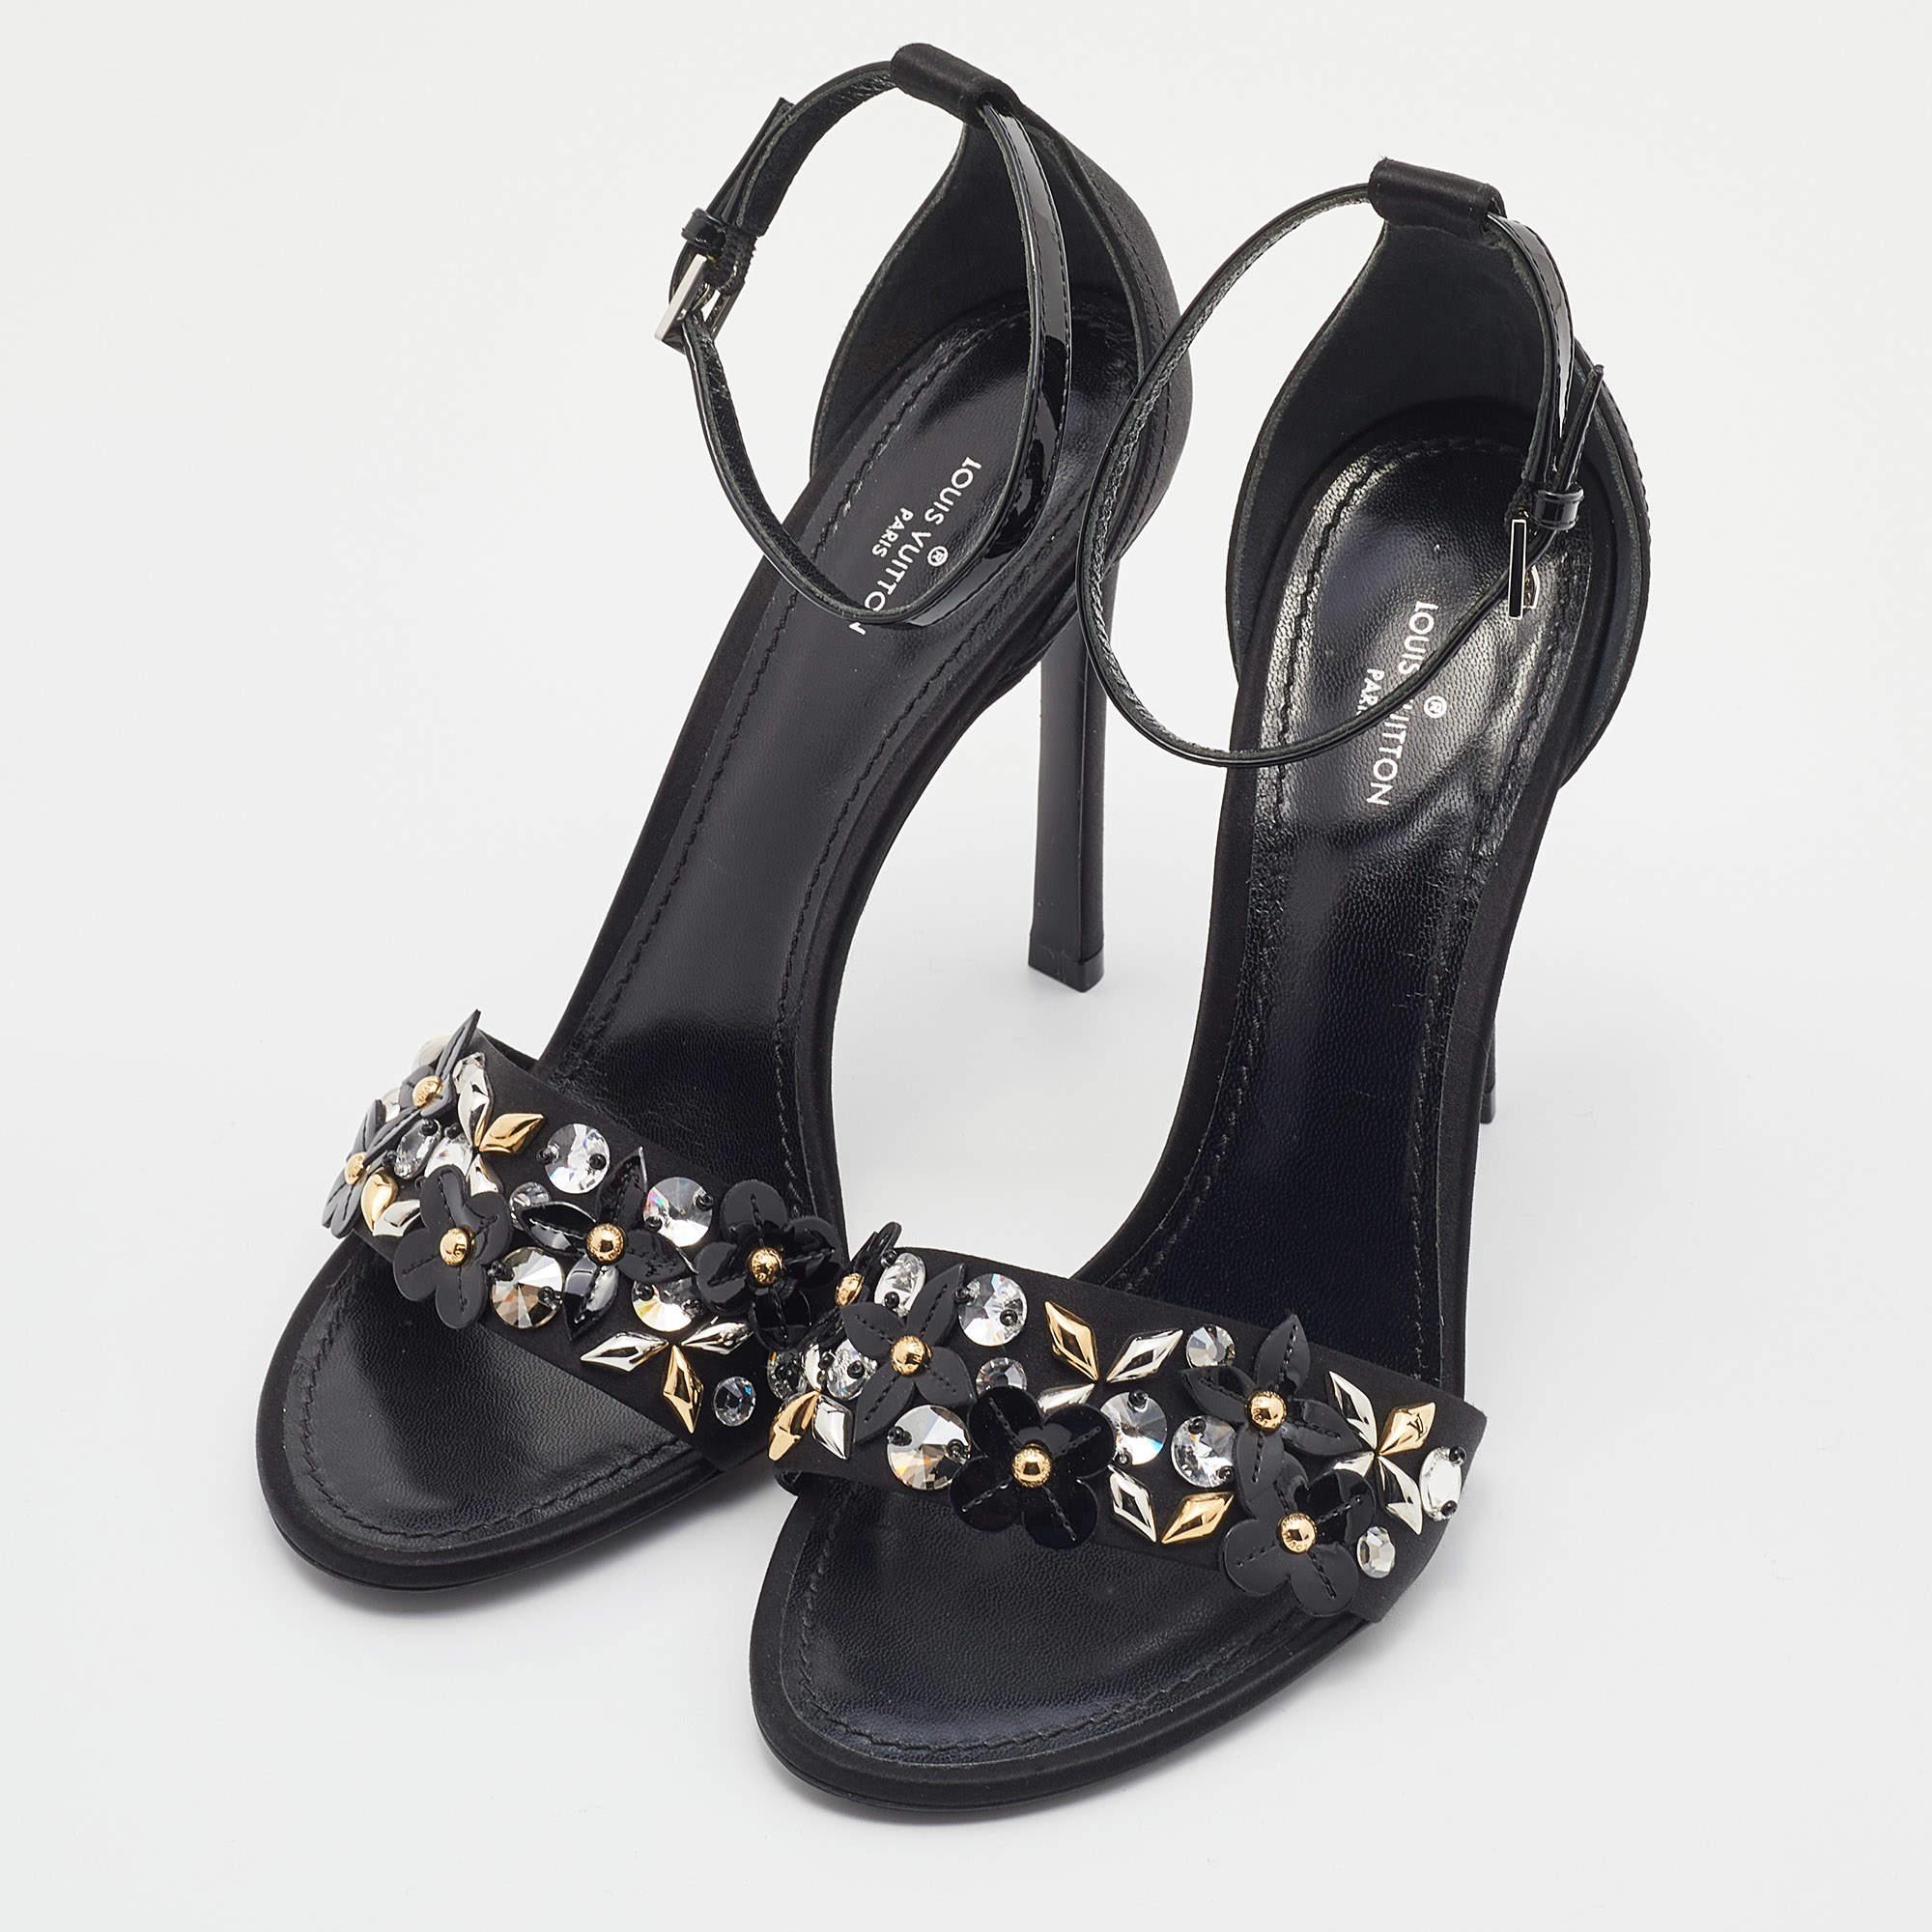 Black Louis Vuitton Satin and Patent Leather Embellished Ankle Strap Sandals Size 38.5